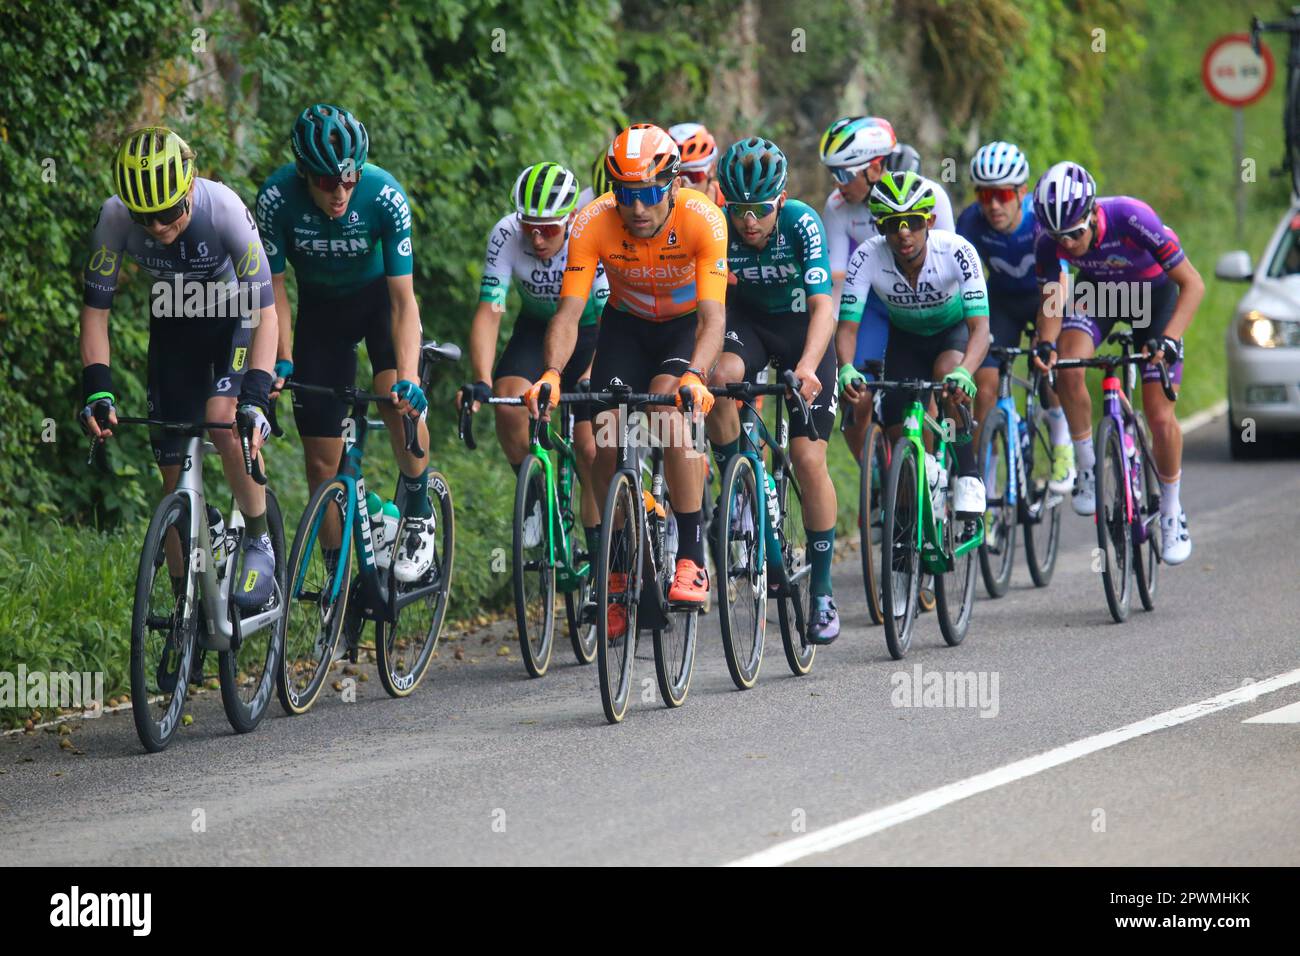 La Rodriga, Spain. 30th Apr, 2023. The escape led by Carl Fredrik Hagen (Q36.5 Pro Cycling Team, L) and Luis Angel Mate (Euskaltel - Euskadi, R) during the 3rd stage of the Vuelta a Asturias 2023 between Cangas del Narcea and Oviedo, on April 30, 2023, in La Rodriga, Spain. (Photo by Alberto Brevers/Pacific Press) Credit: Pacific Press Media Production Corp./Alamy Live News Stock Photo